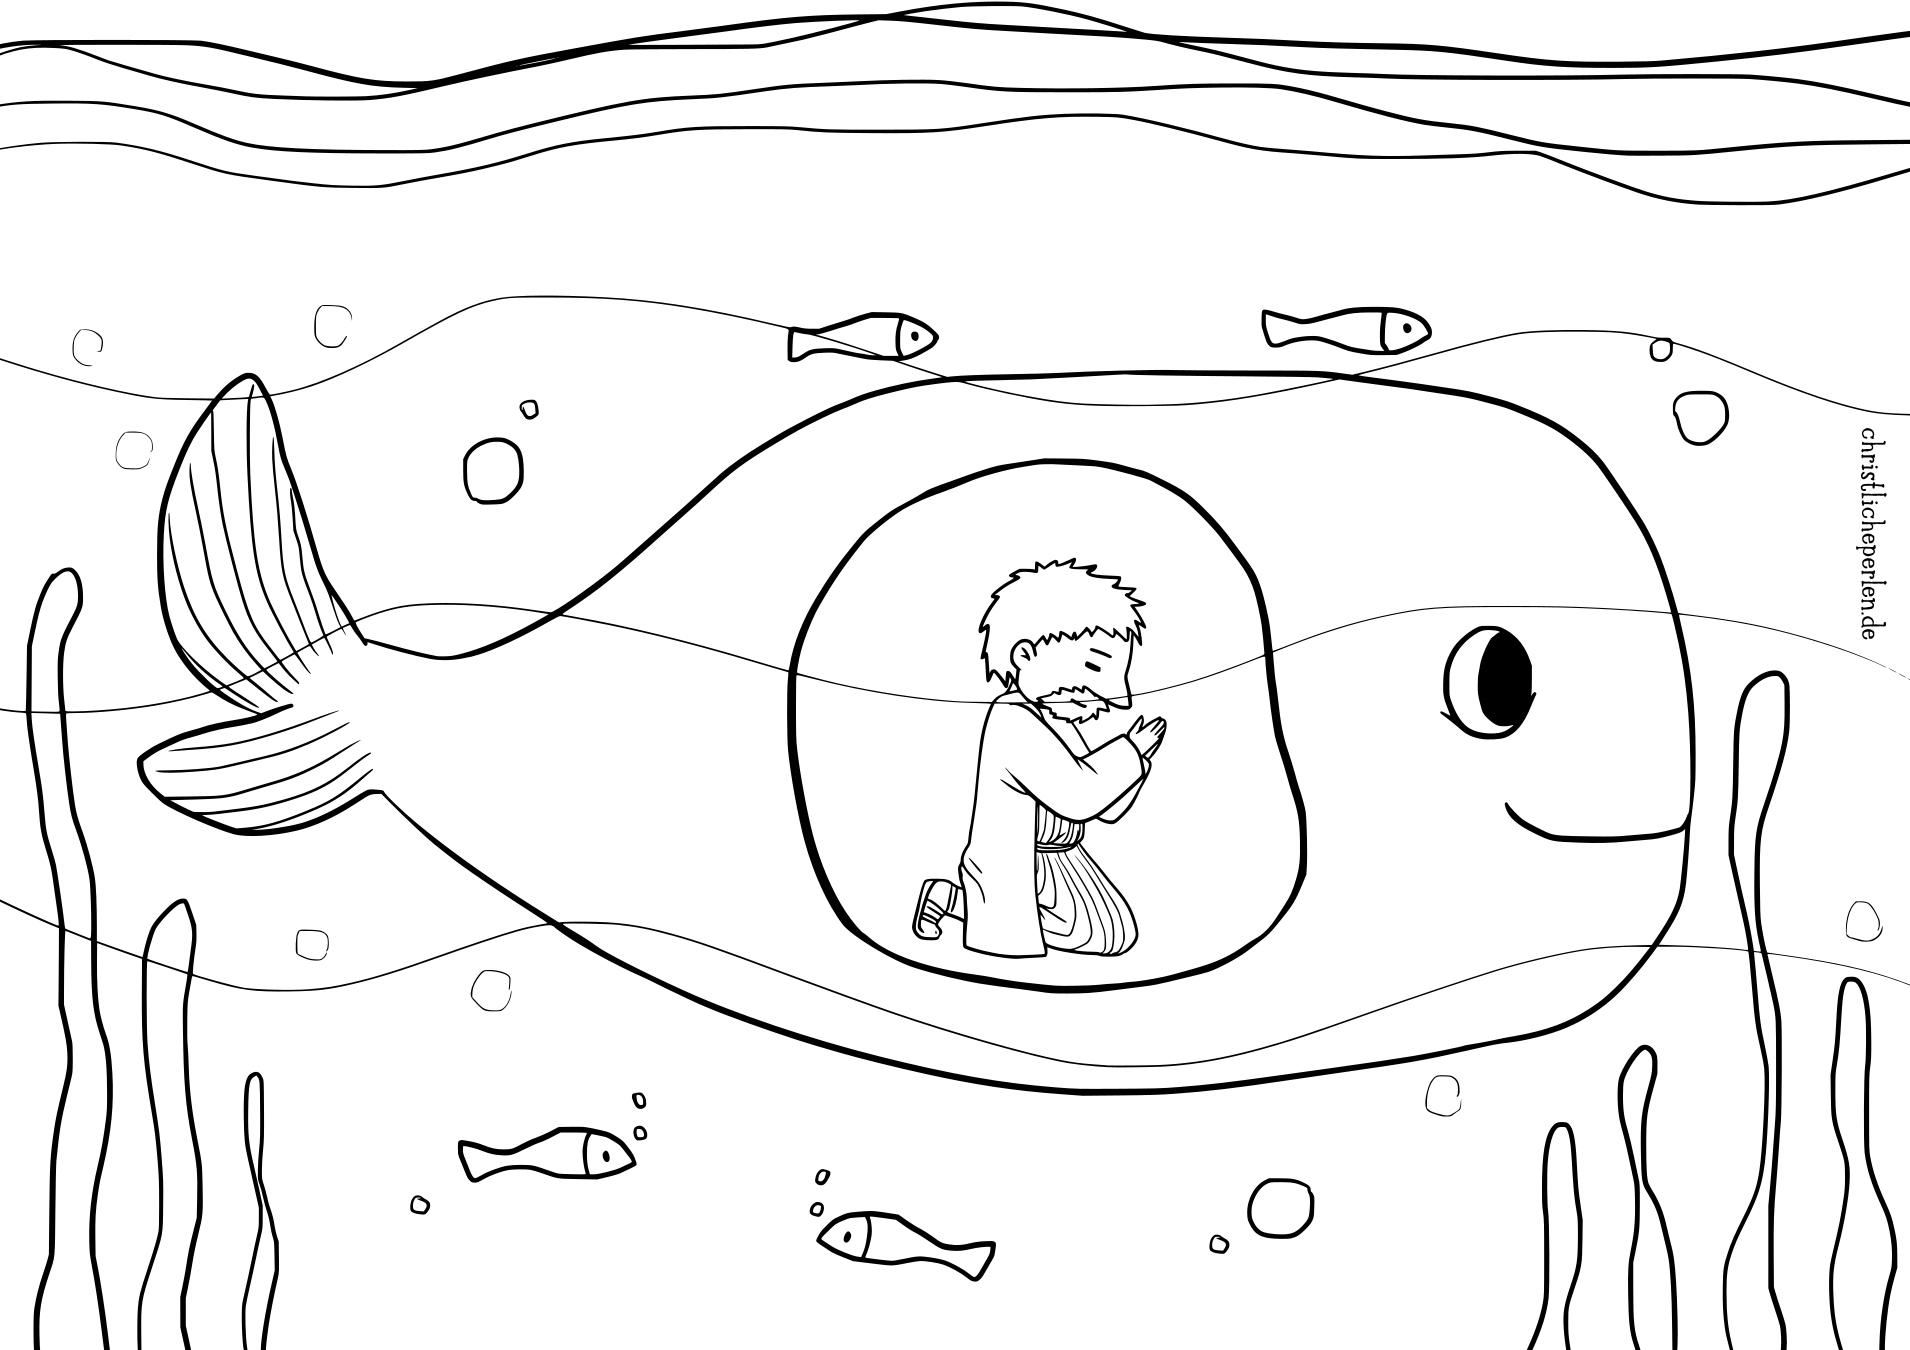 excellent-picture-of-jonah-and-the-whale-coloring-pages